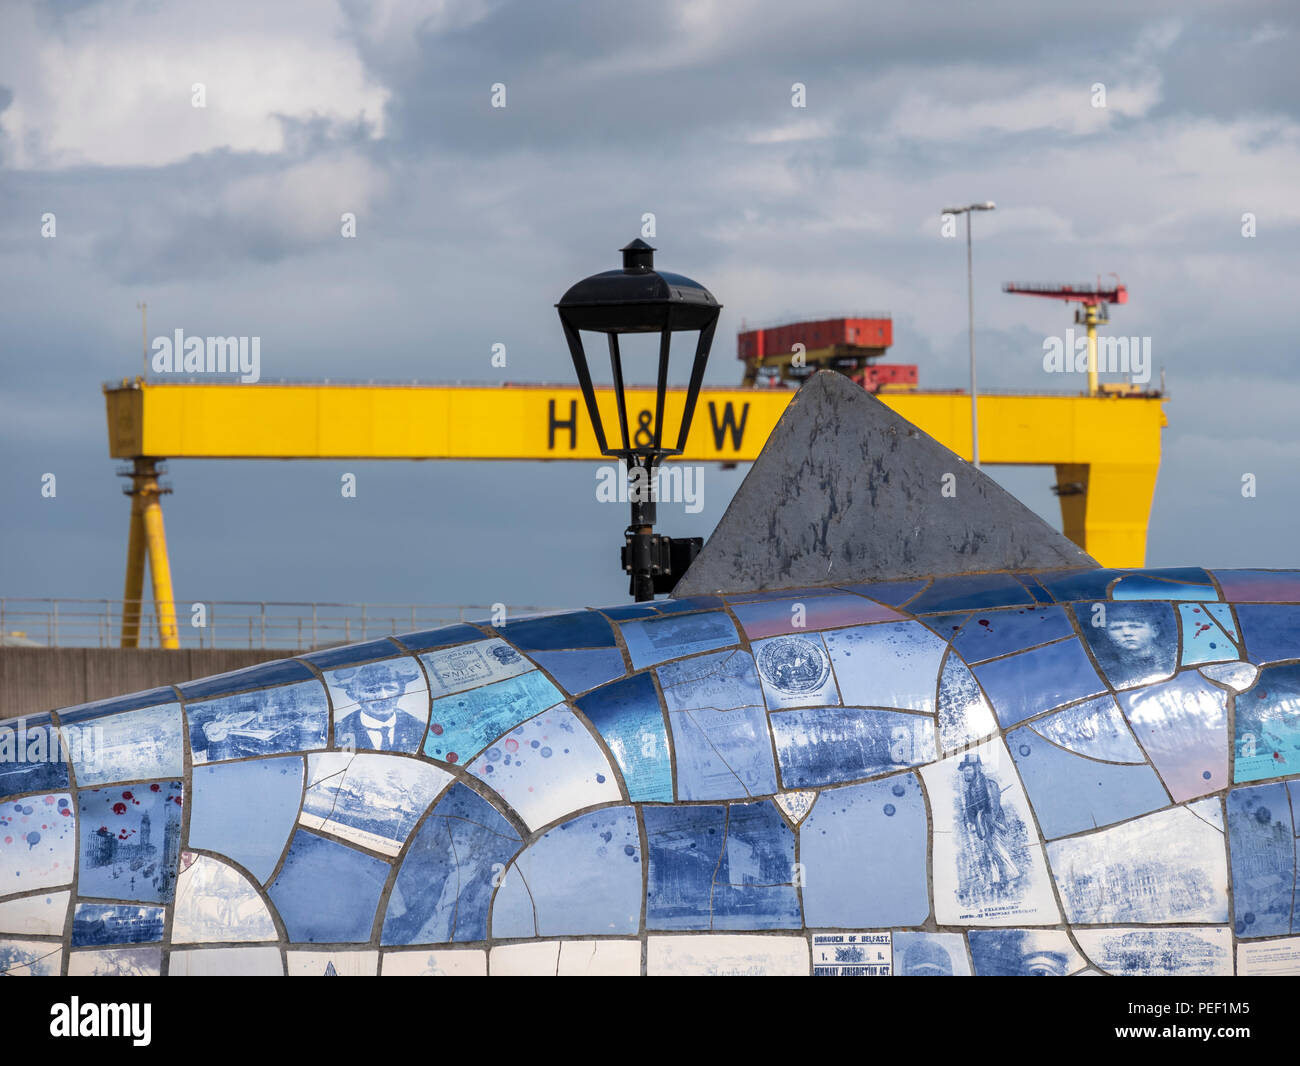 Belfast, Northern Ireland, UK -  August, 8, 2018: The Big Fish or Salmon of Knowledge with one of the Harland and Wolff shipyard cranes in the backgro Stock Photo